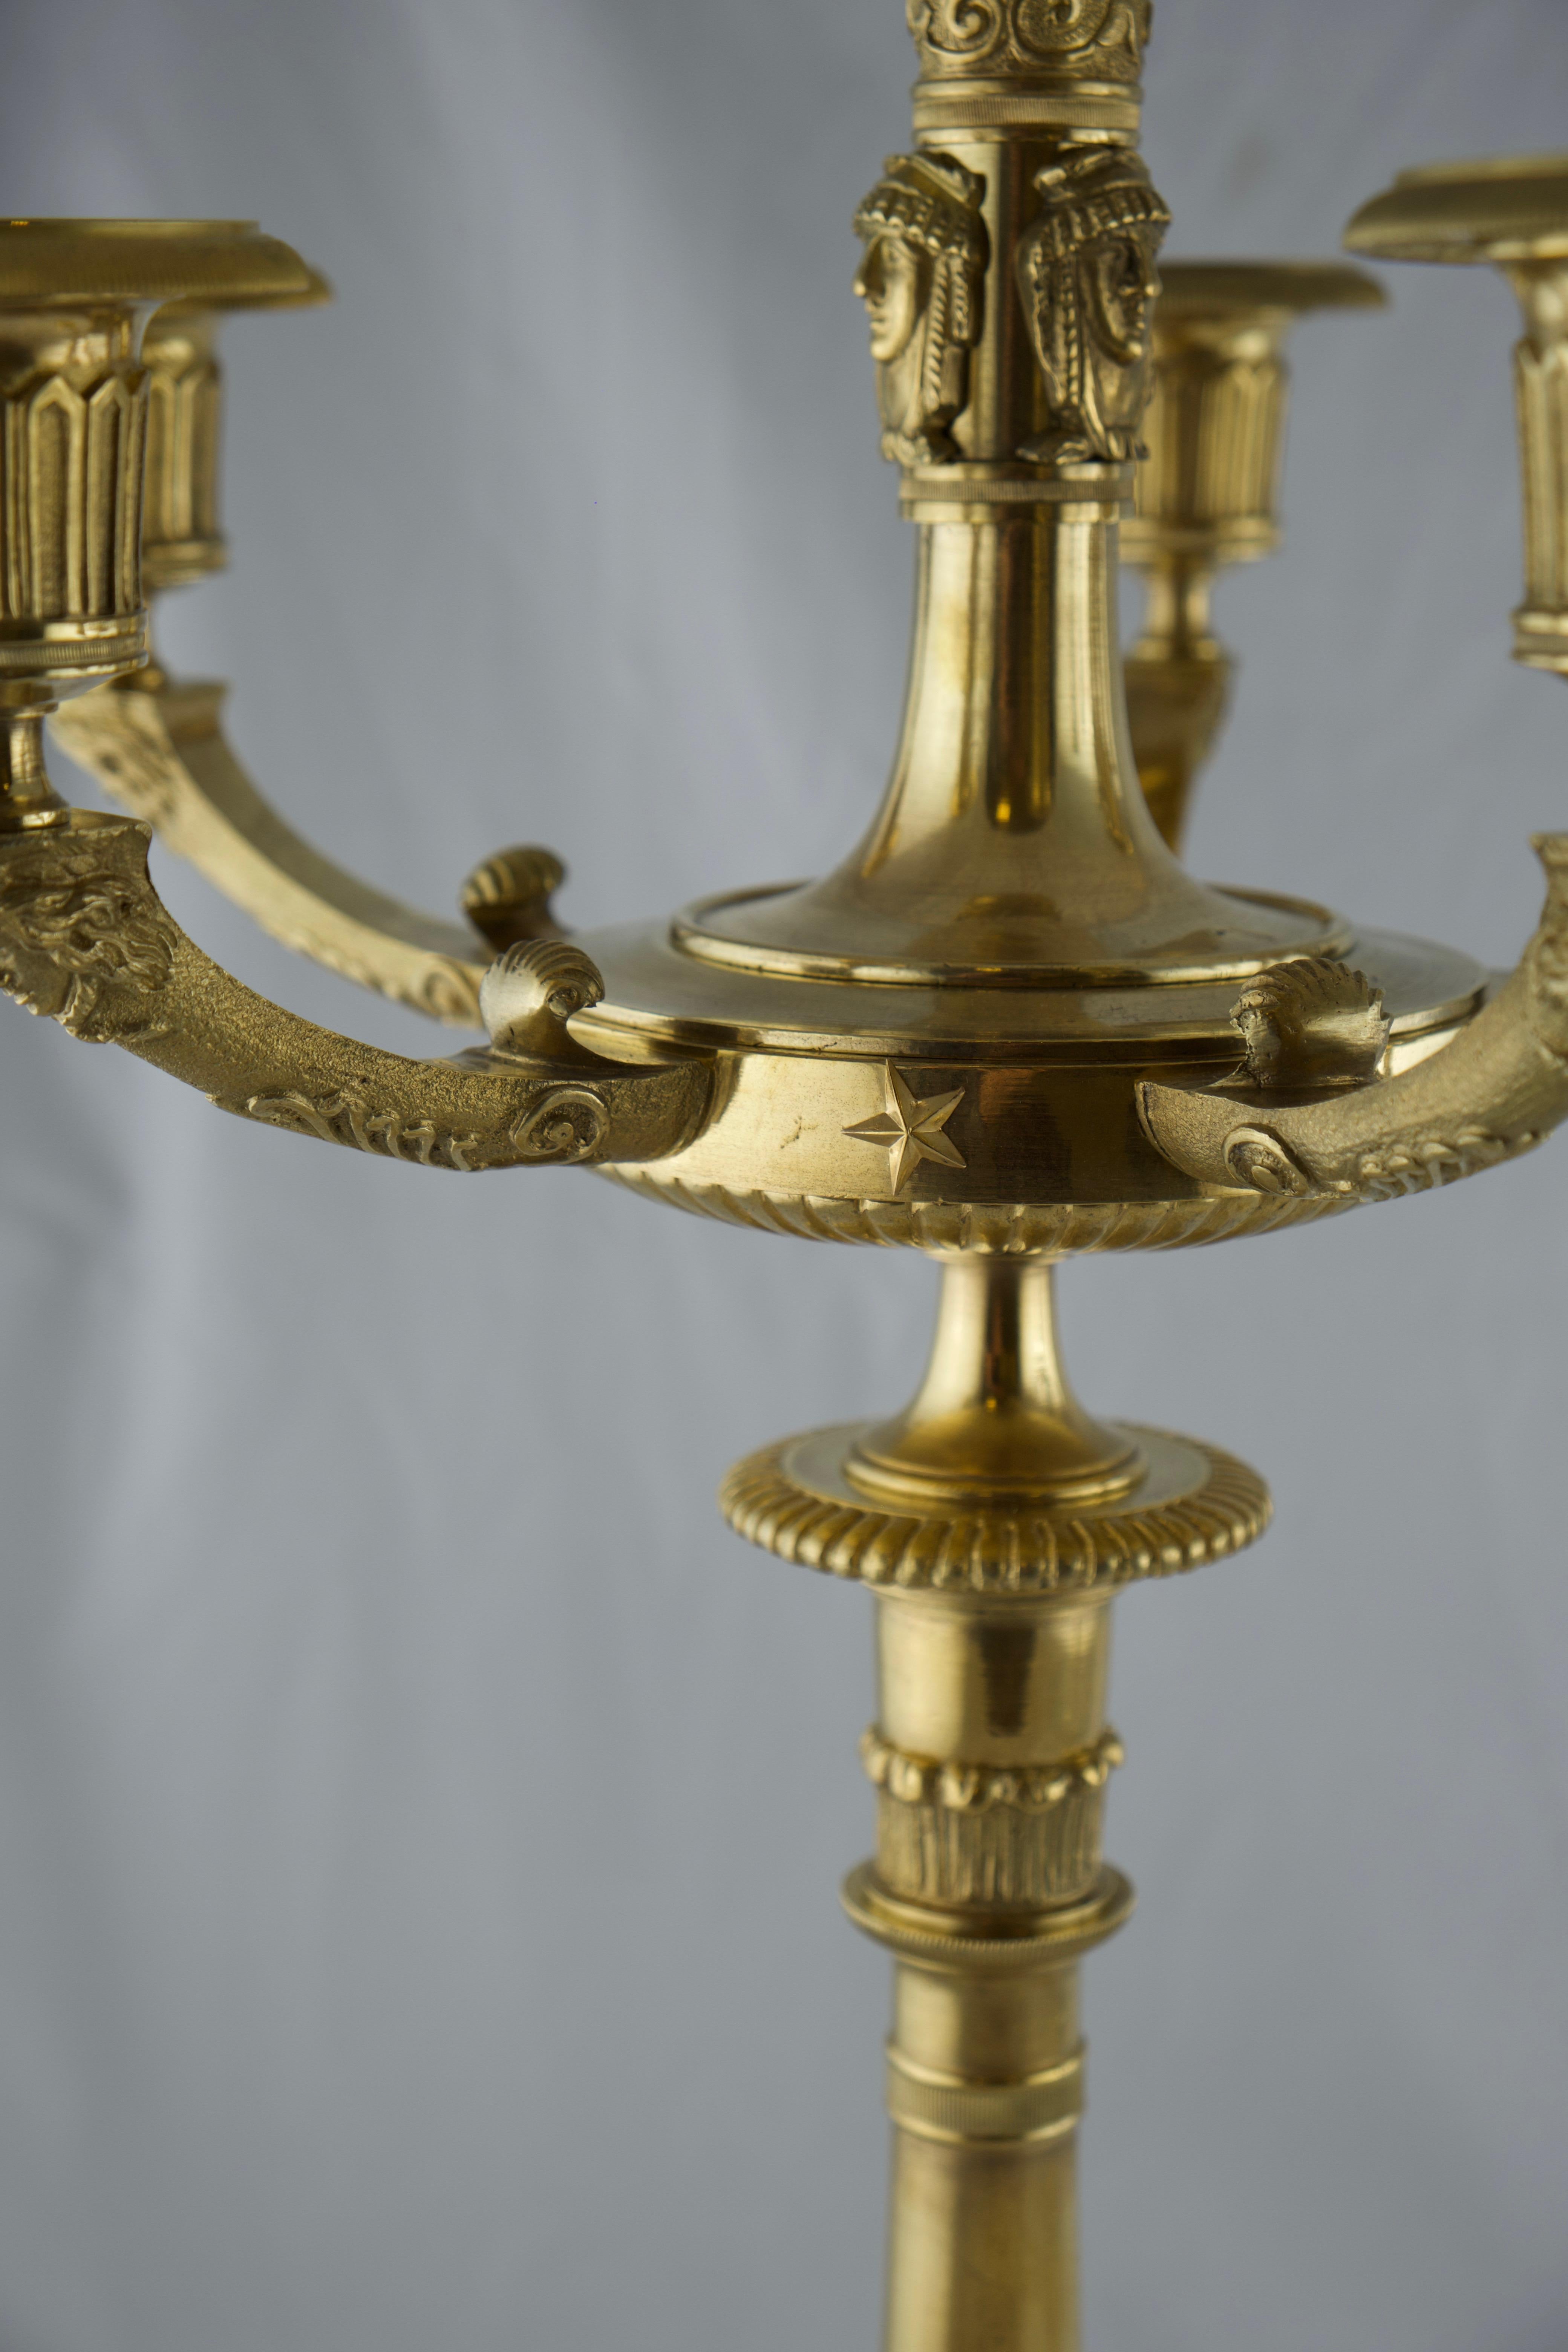 19th Century Pair of French Empire Gilt Candelabra, Early 19th C